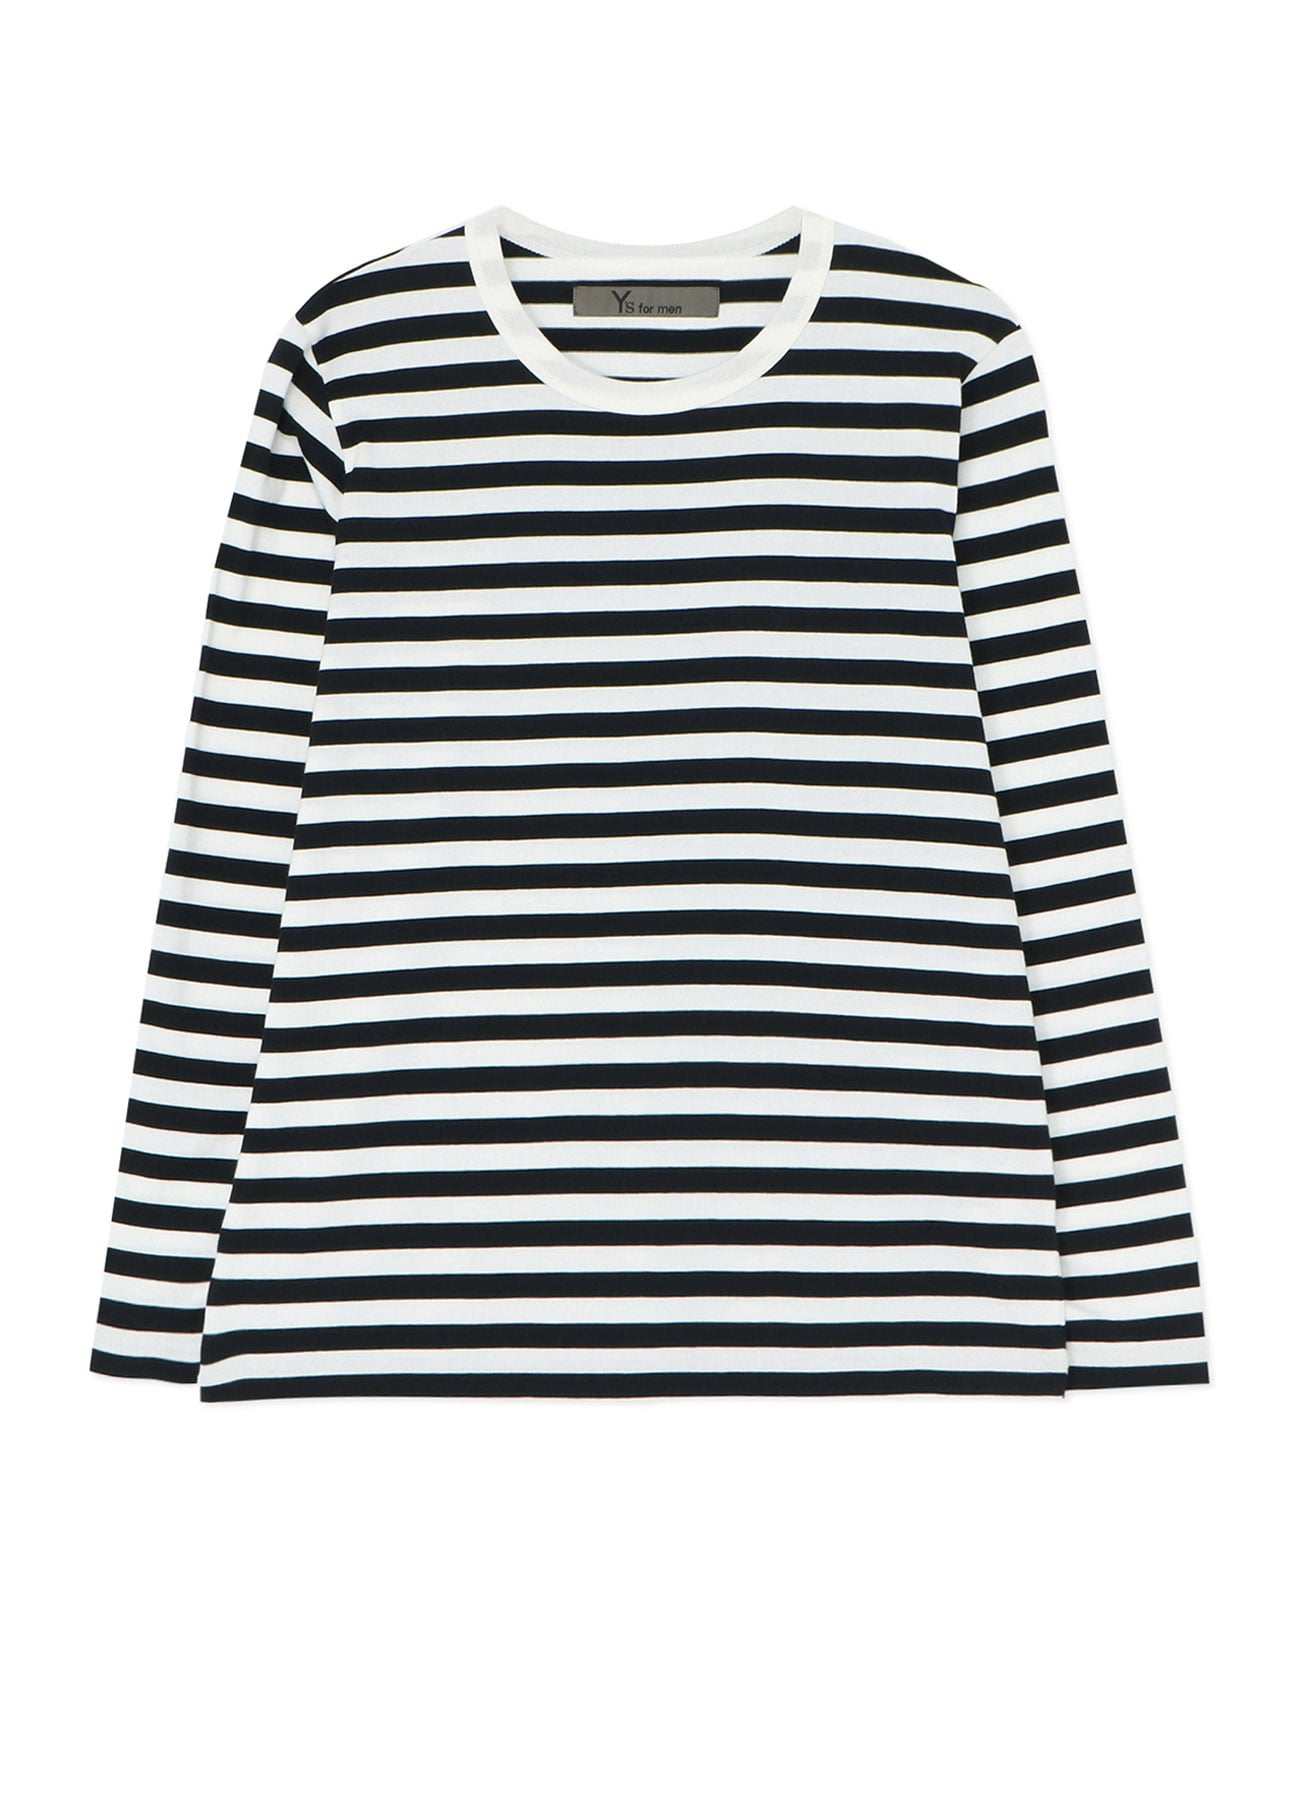 LONG SLEEVE T-SHIRT WITH NARROW STRIPES